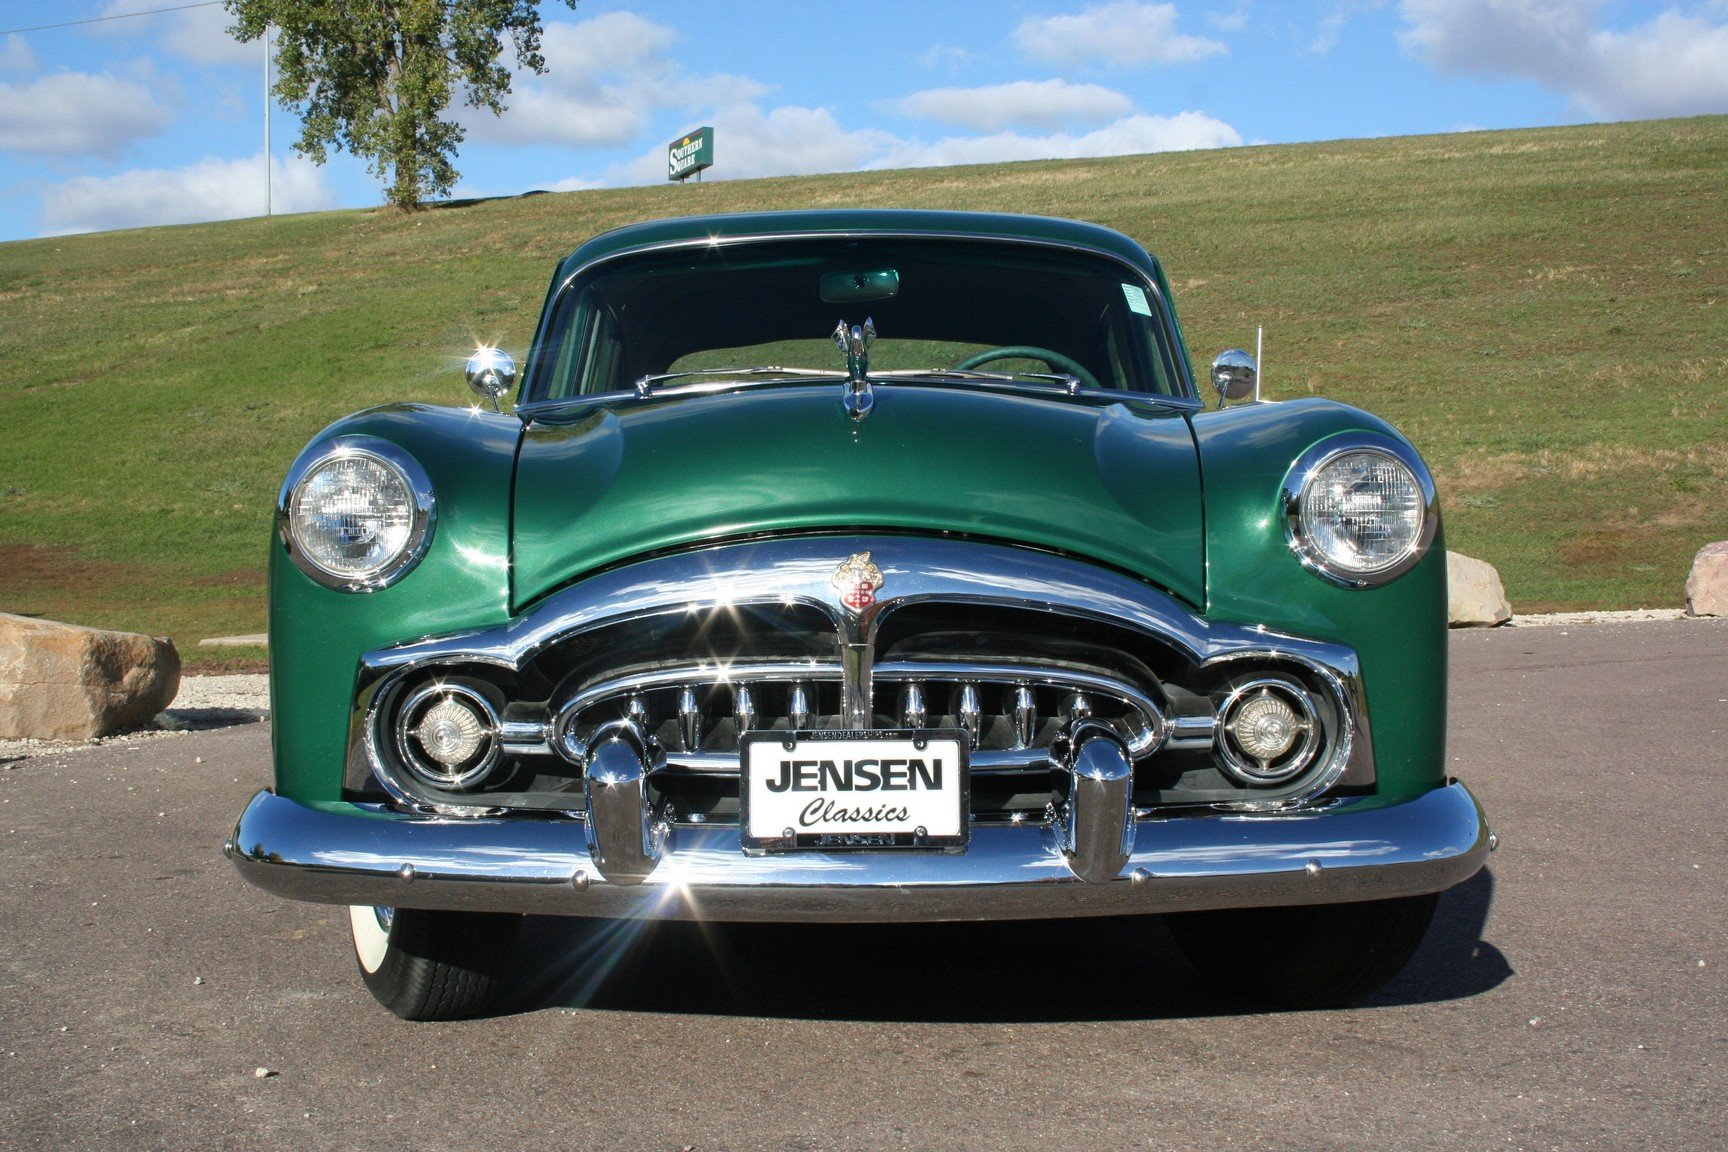 1952, Packard, 200, Deluxe, Sedan, Classic, Old, Vintage, Usa, 1728xc1152 03 Wallpaper